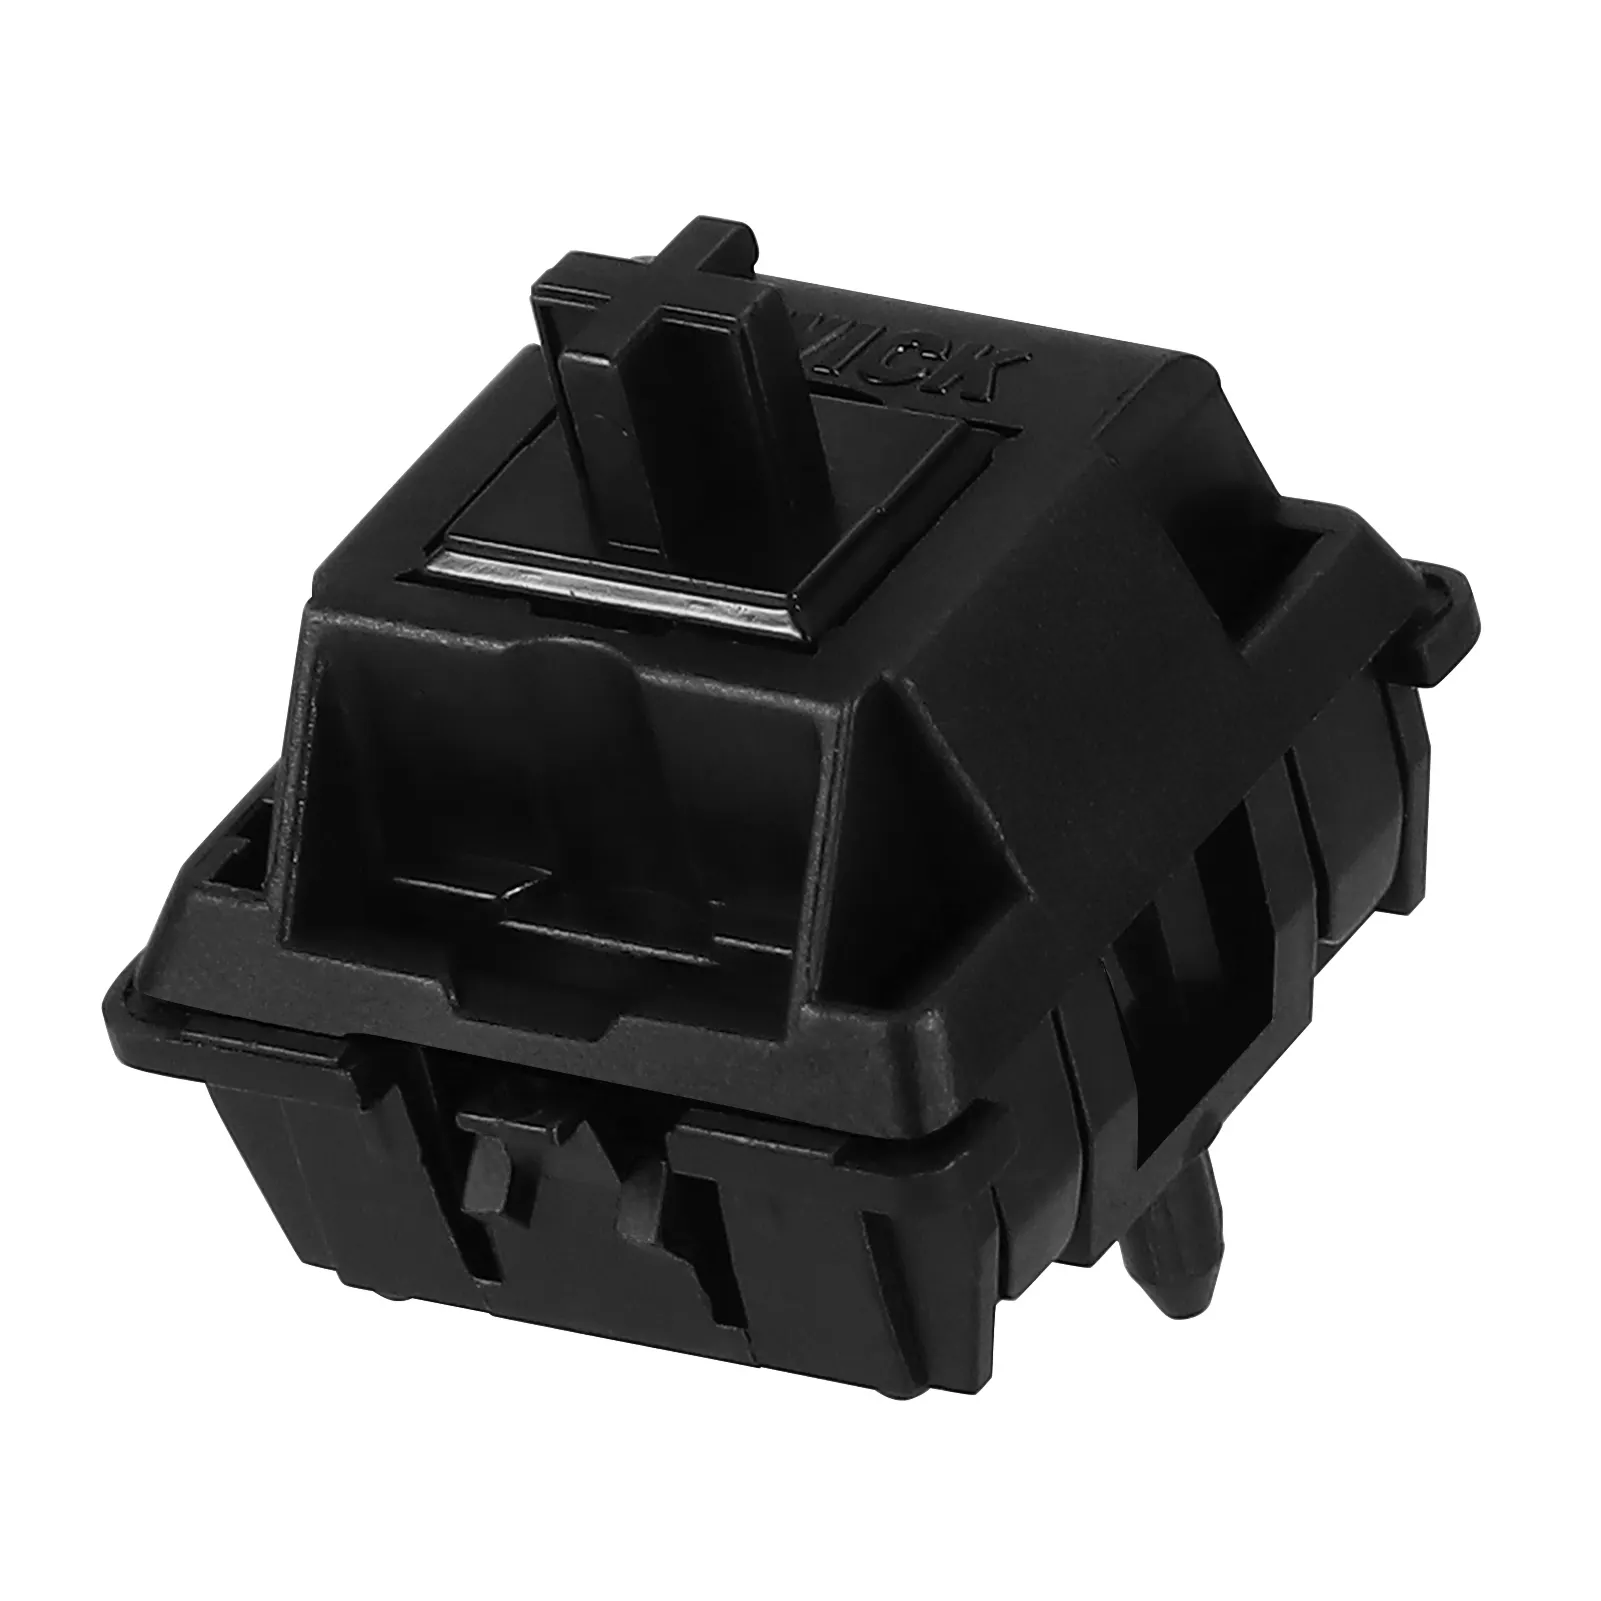 JWICK Linear Switch JWK Ultimate Black Keyboard Switch with Full Nylon Housing Mechanical Switches 58.5g for DIY Keyboards